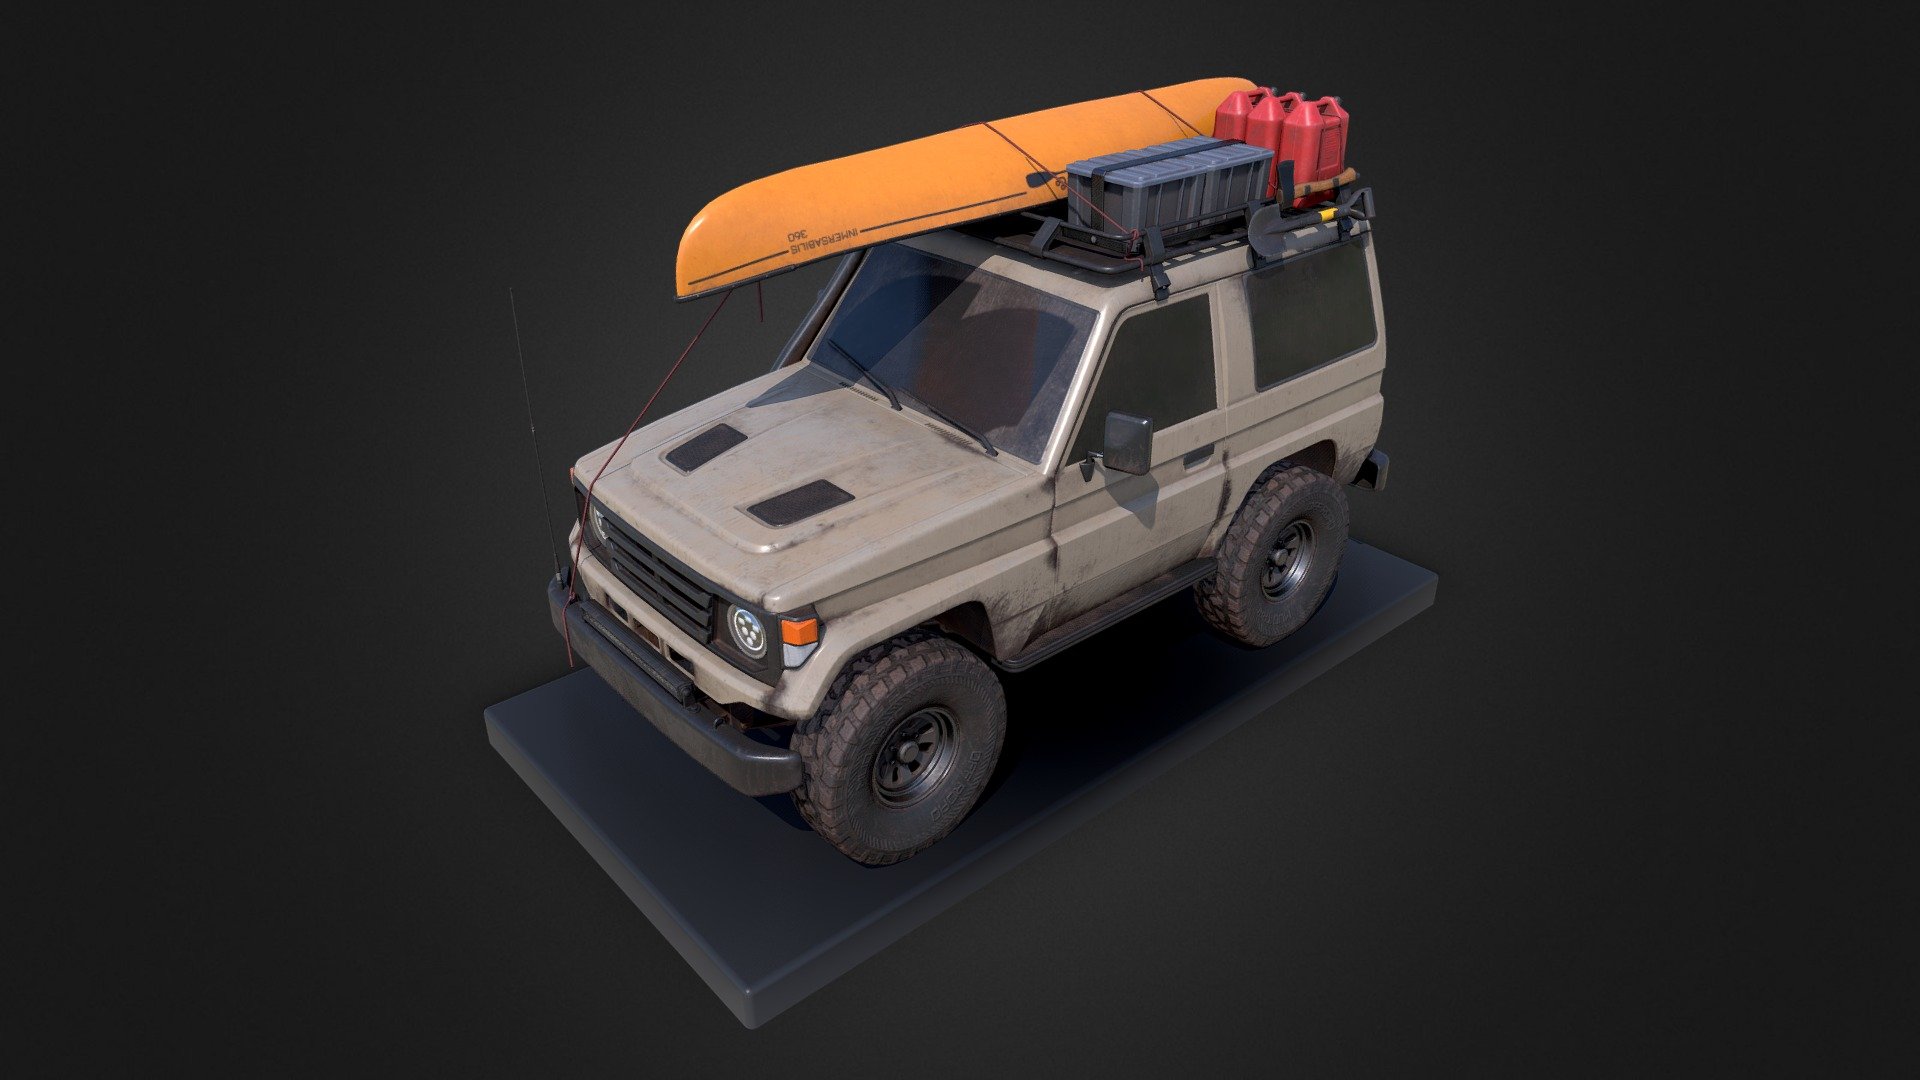 This is a game ready model I created for a school assignment. My idea was to create the adventurers dream car. It's an old Land Cruiser, a bit rusty but working just fine. Some modern modifications and add-ons fitted, as well as some bits and pieces that one might want when going on an adventure.

Check out some renders on Artstation: https://www.artstation.com/artwork/2qYBXg - 4x4 Off Roader - 3D model by thethieme 3d model